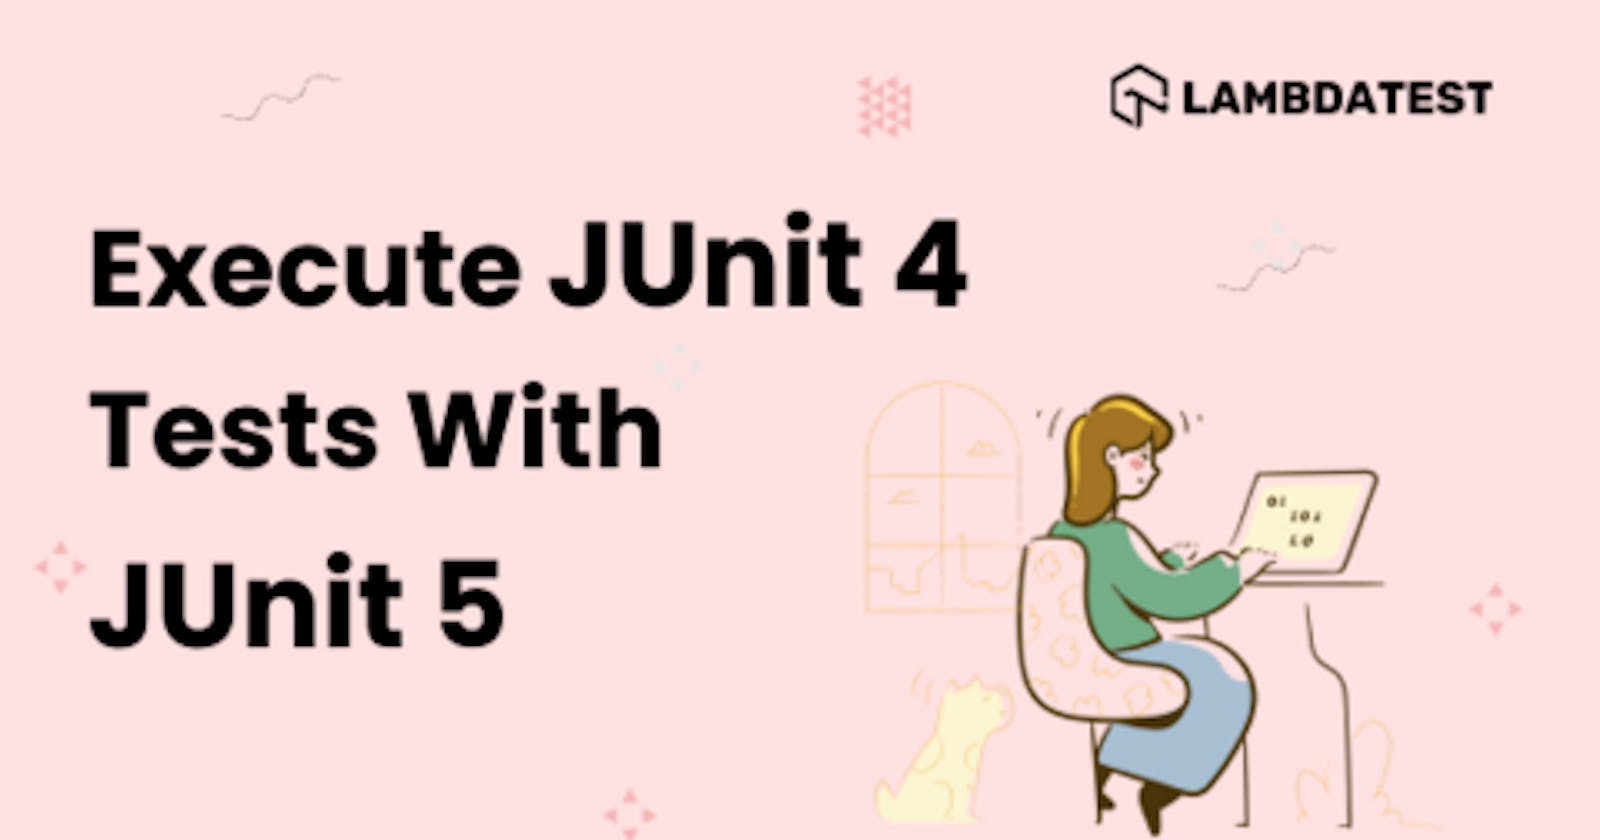 How to execute JUnit 4 tests with JUnit 5 [Tutorial]